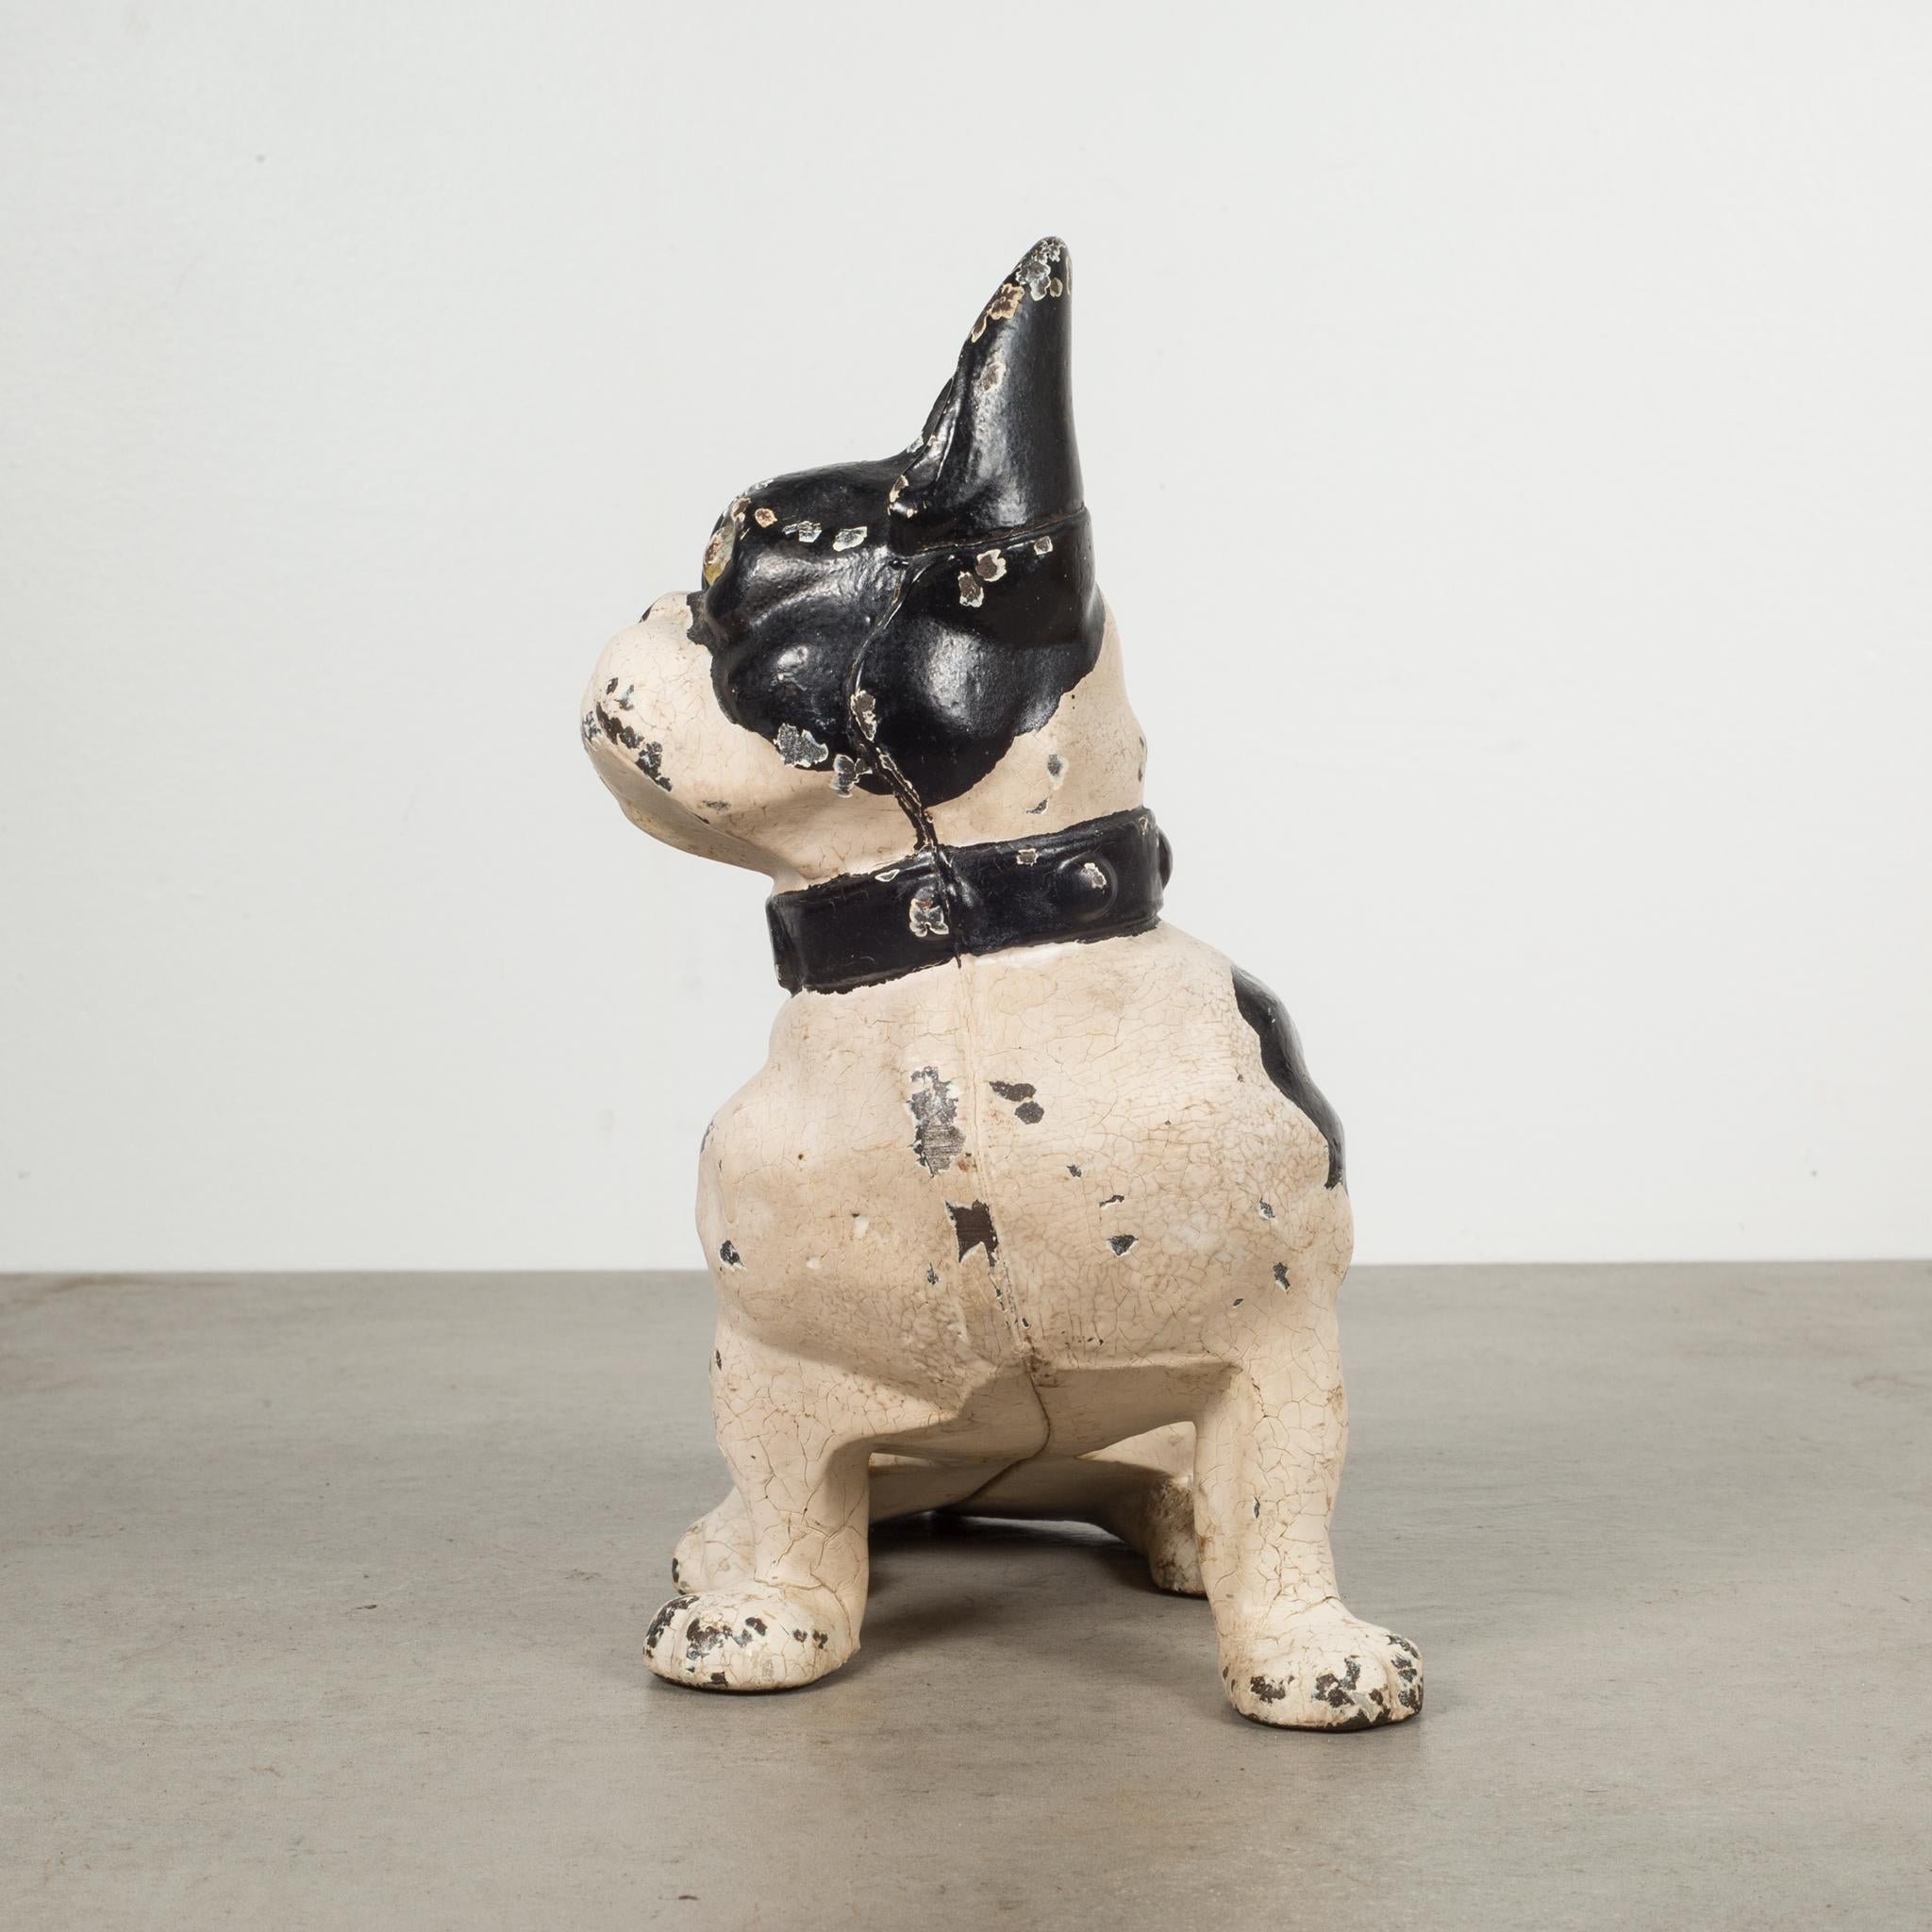 About

An original cast iron French Bulldog doorstop manufactured by the Hubley Manufacturing Company in Lancaster Pennsylvania USA. The piece has retained its original hand painted finish and is in excellent condition with the appropriate patina